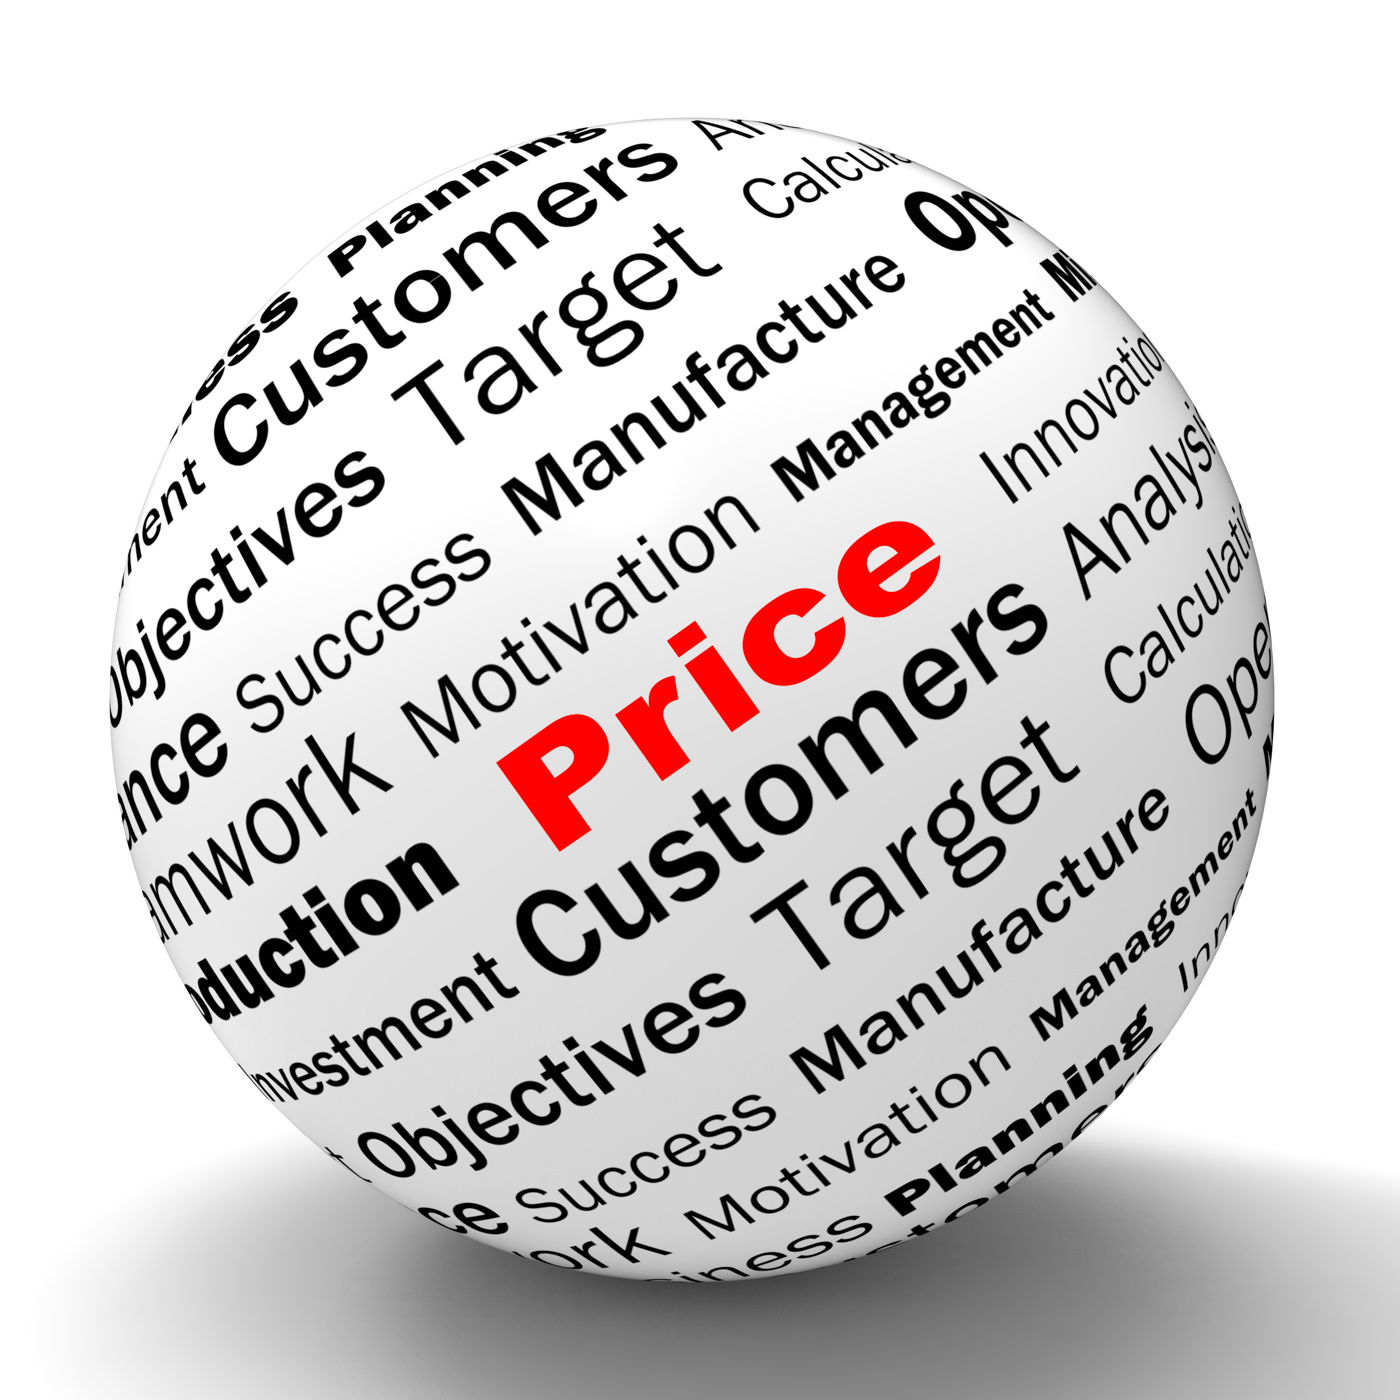 Price sphere definition means promotions and savings photo